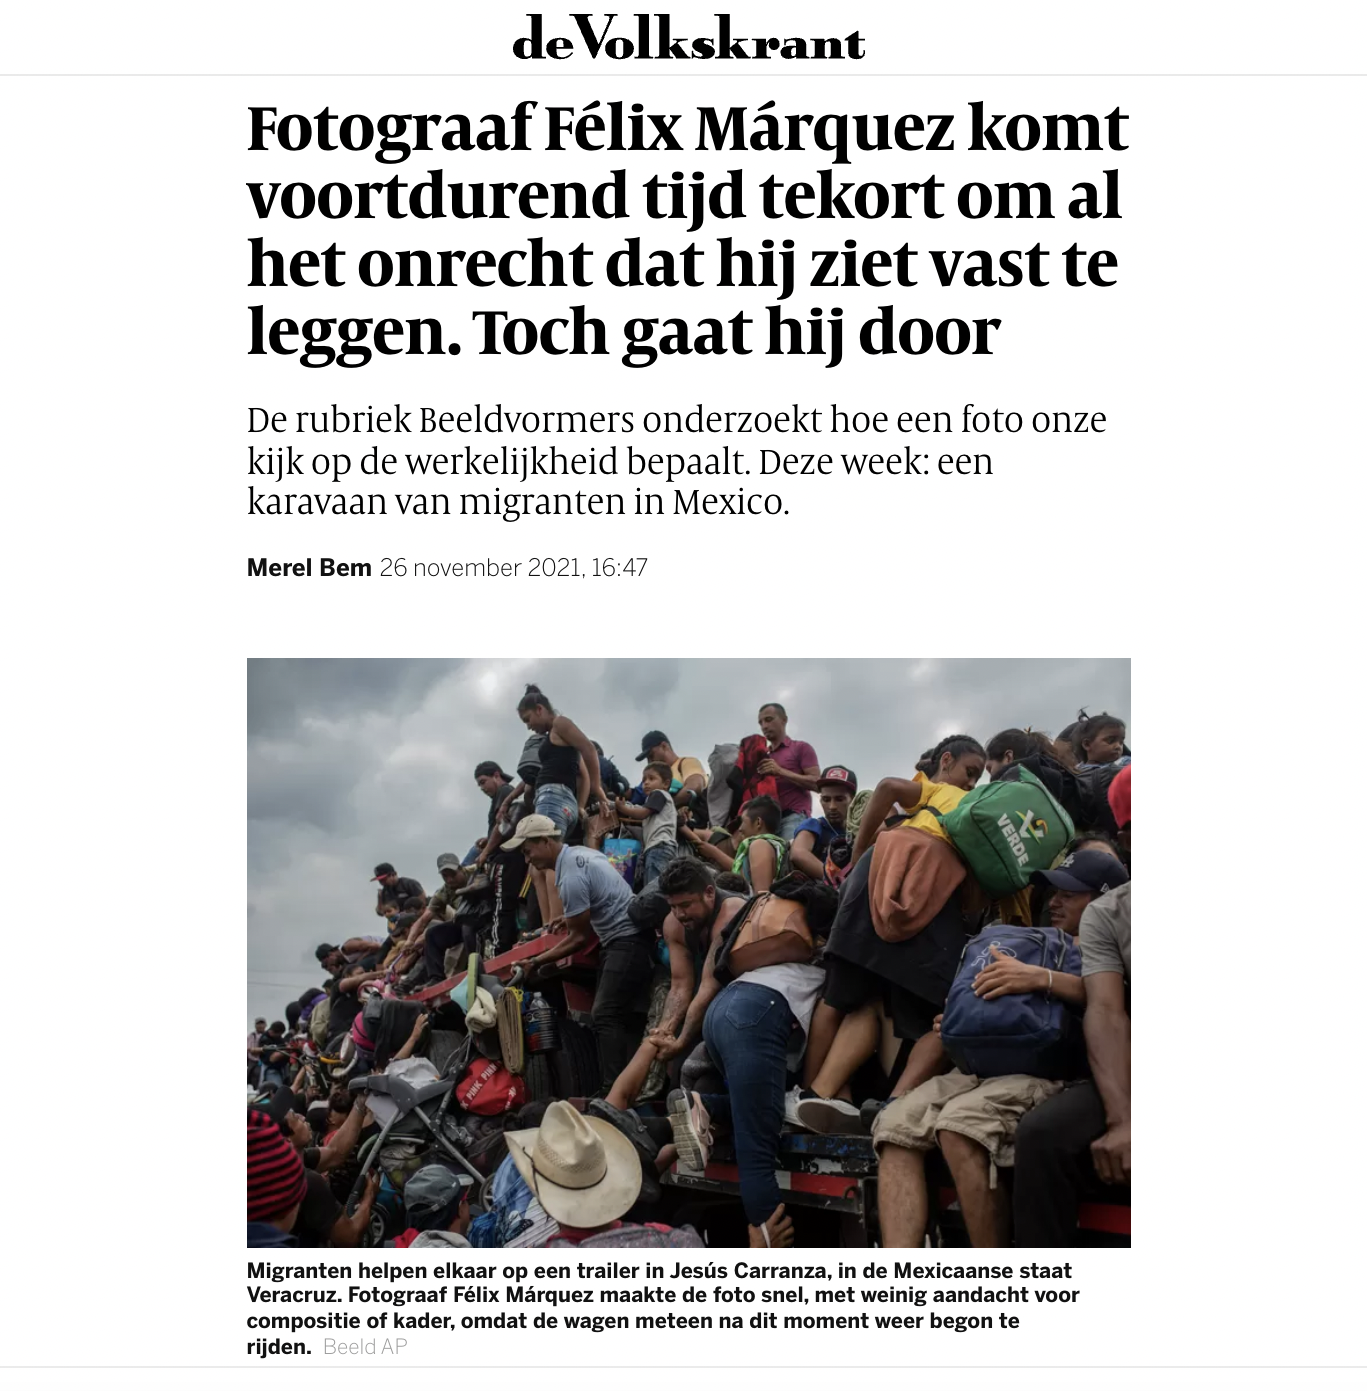 Thumbnail of About my photo in the migrant caravan. Text by Merel Bem for De Volkskrant